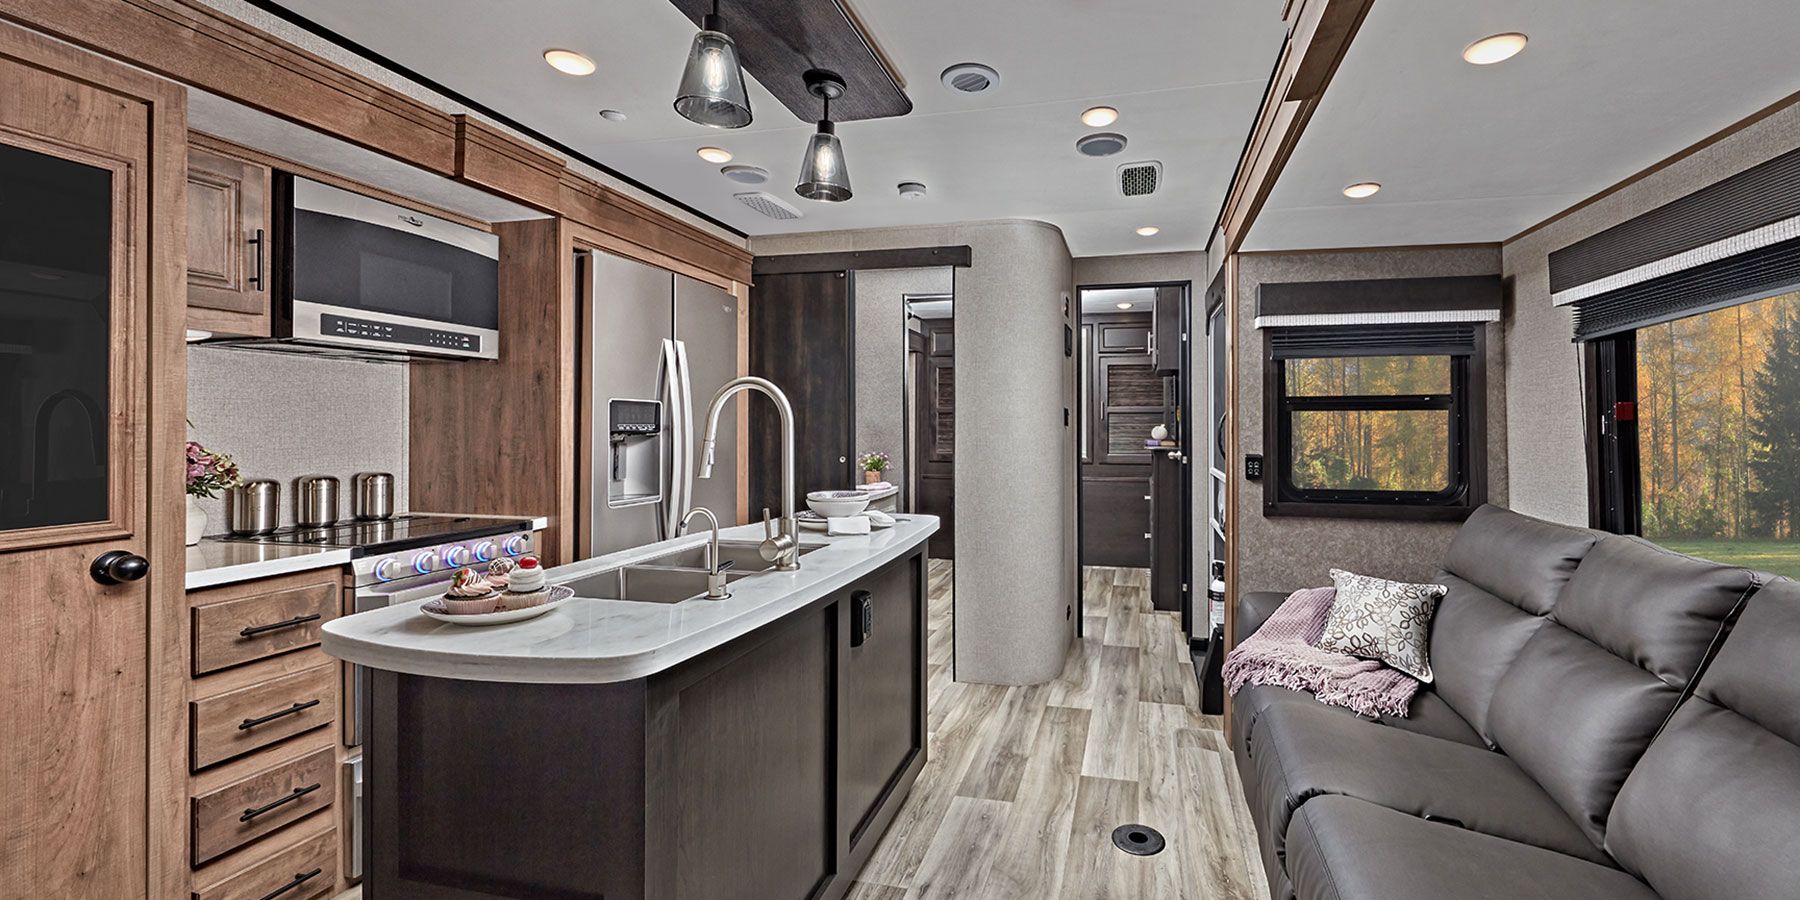 5 Best Jayco Travel Trailers in 2021